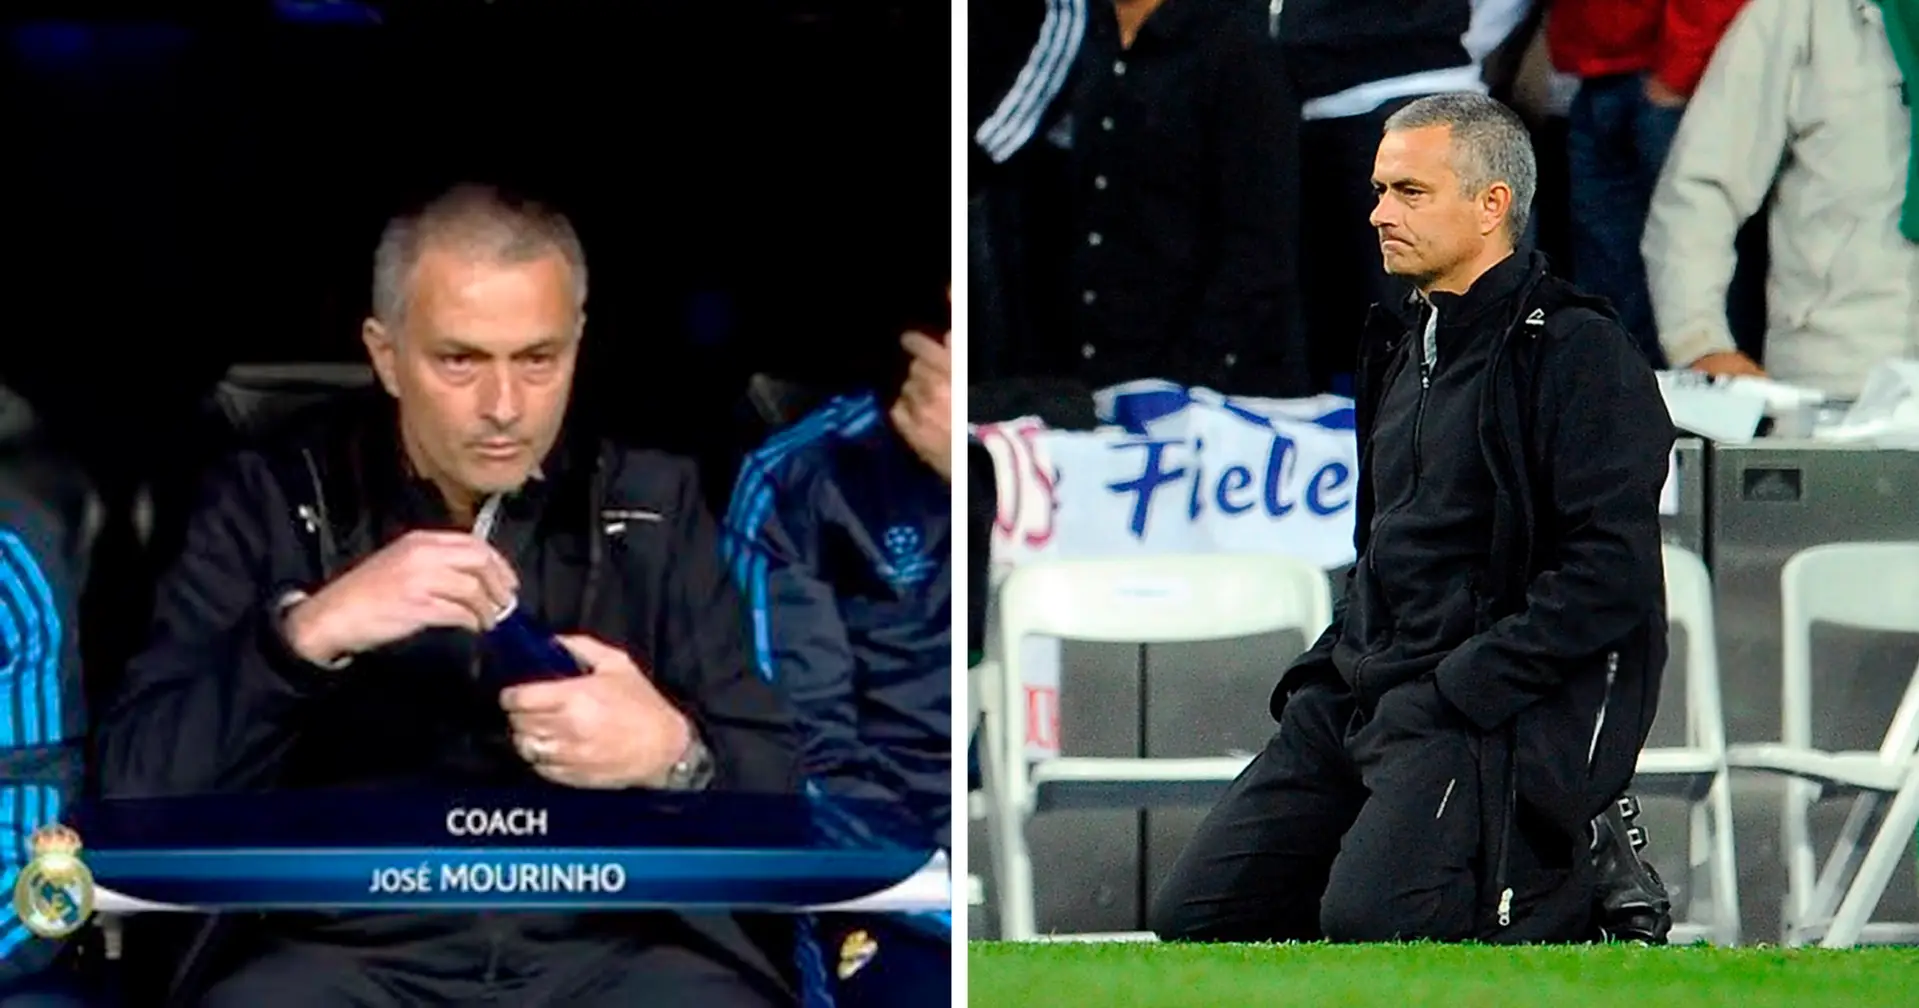 "The most painful of my career": Mourinho reveals the only managerial defeat that made him cry